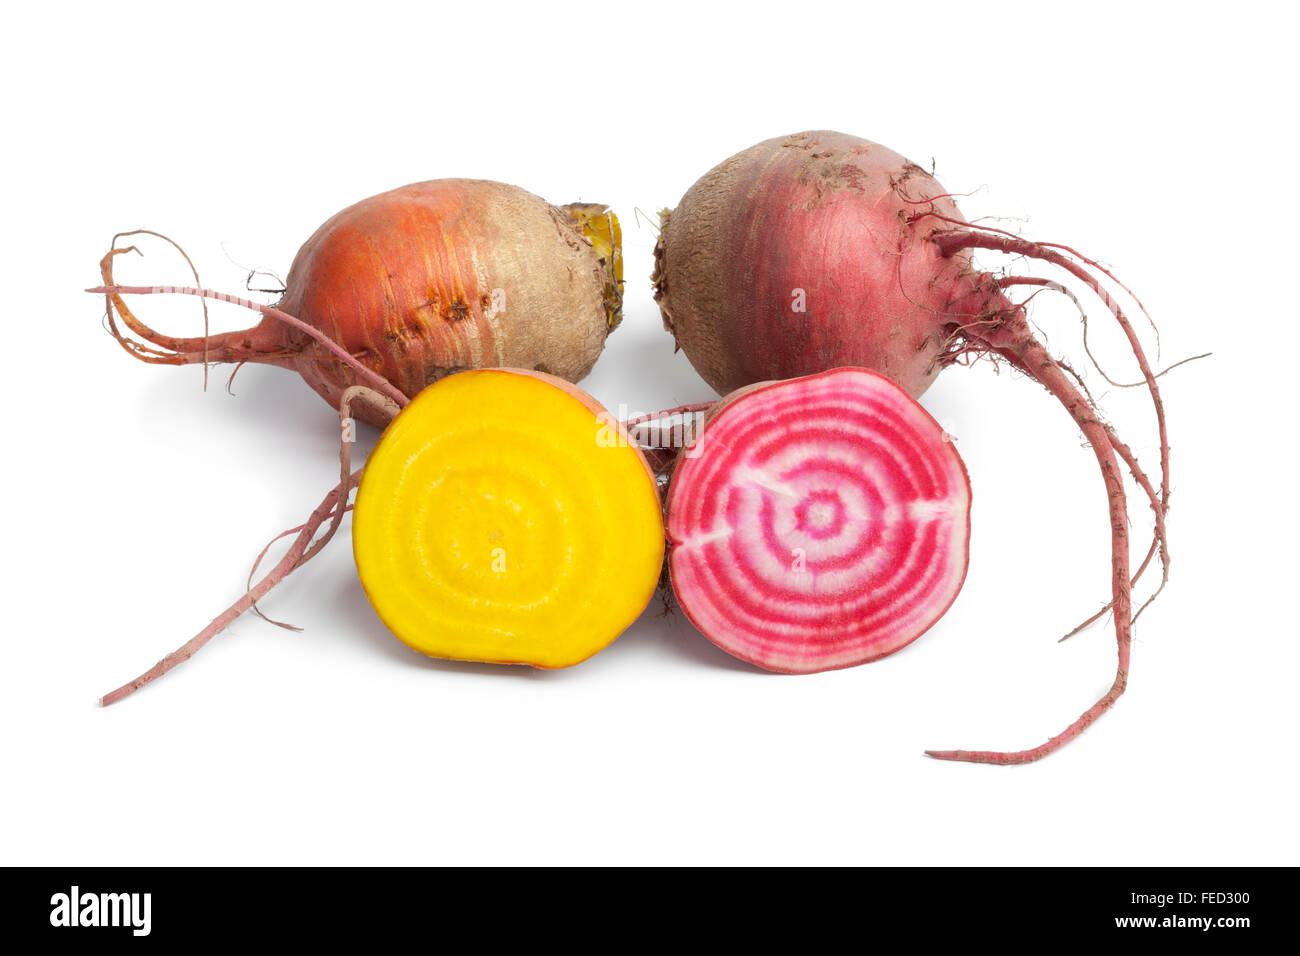 Fresh raw Chioggia beets and yellow beets on white background Stock Photo